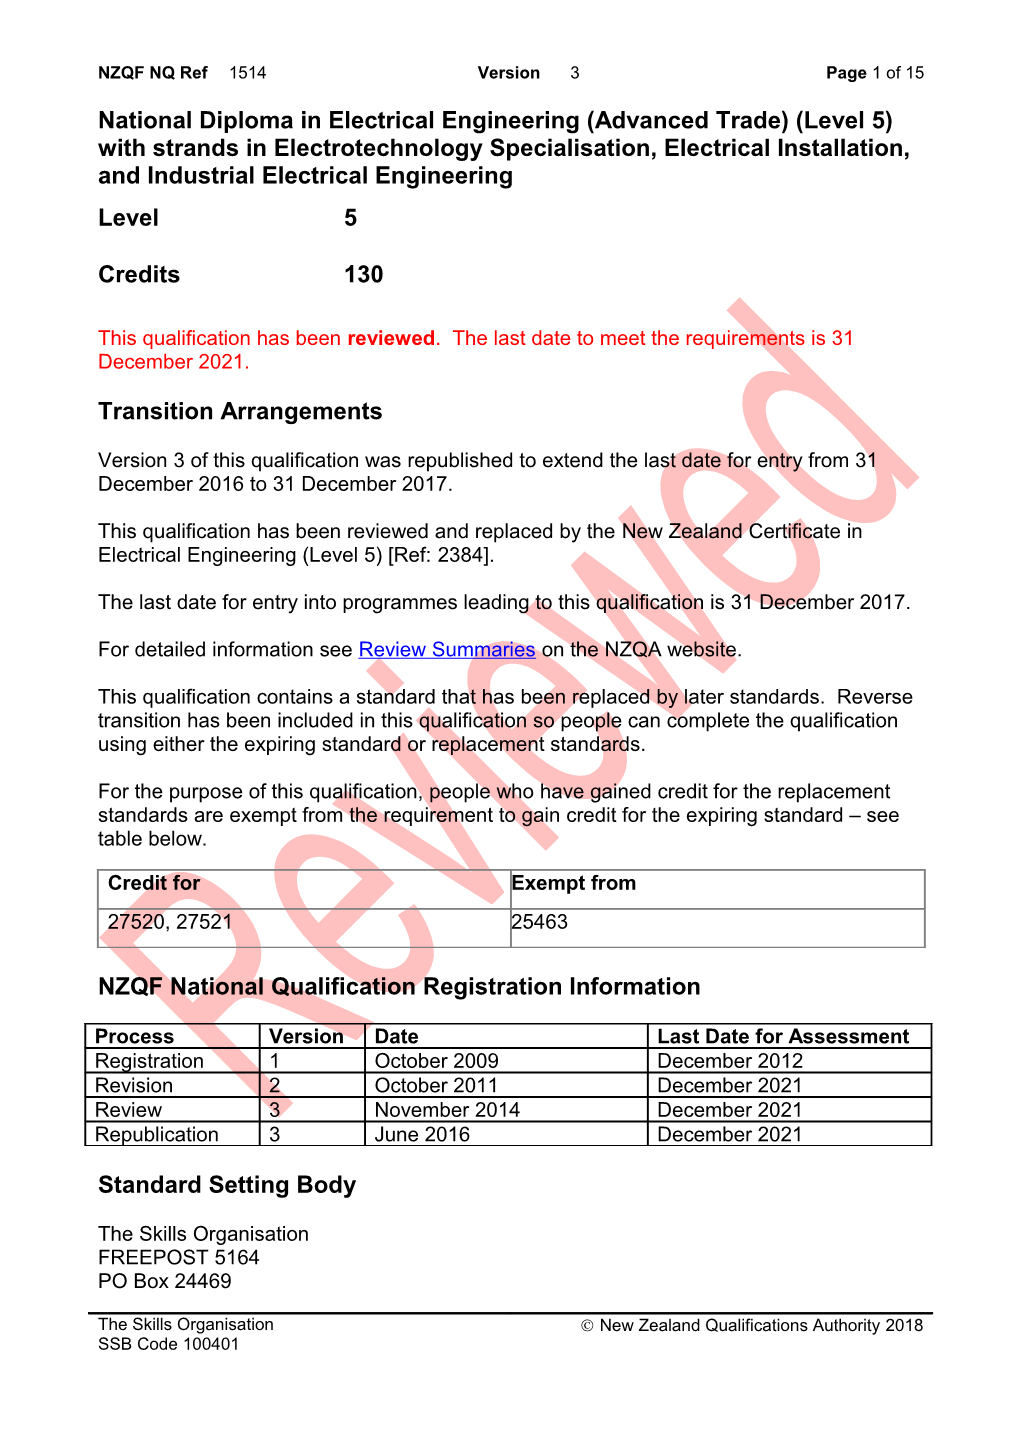 1514 National Diploma in Electrical Engineering (Advanced Trade) (Level 5) with Strands